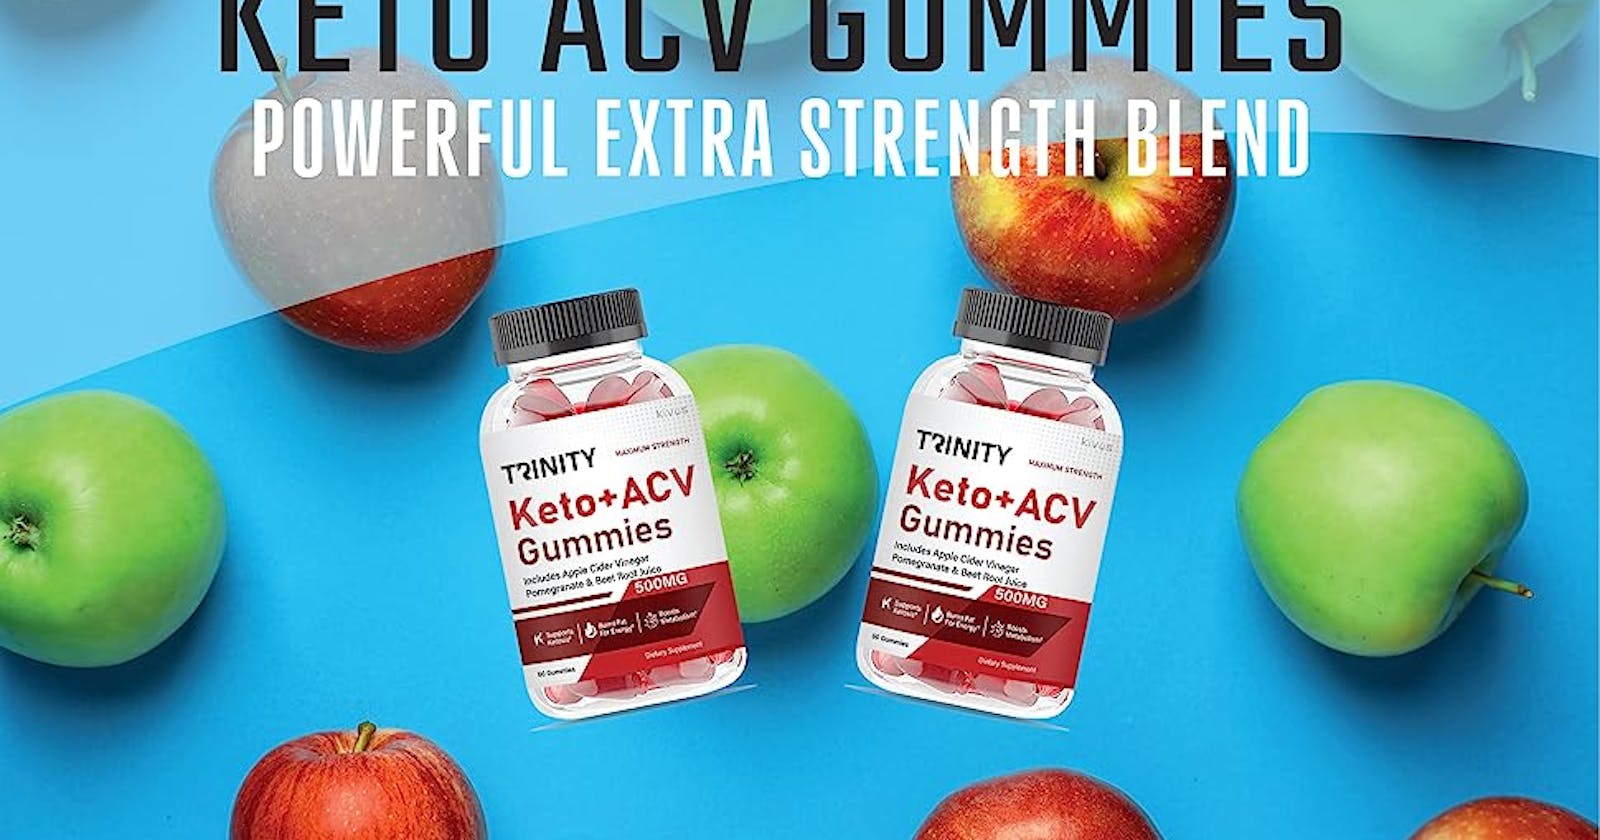 Trinity Keto ACV Gummies: Your Key to a Healthy and Active Lifestyle!